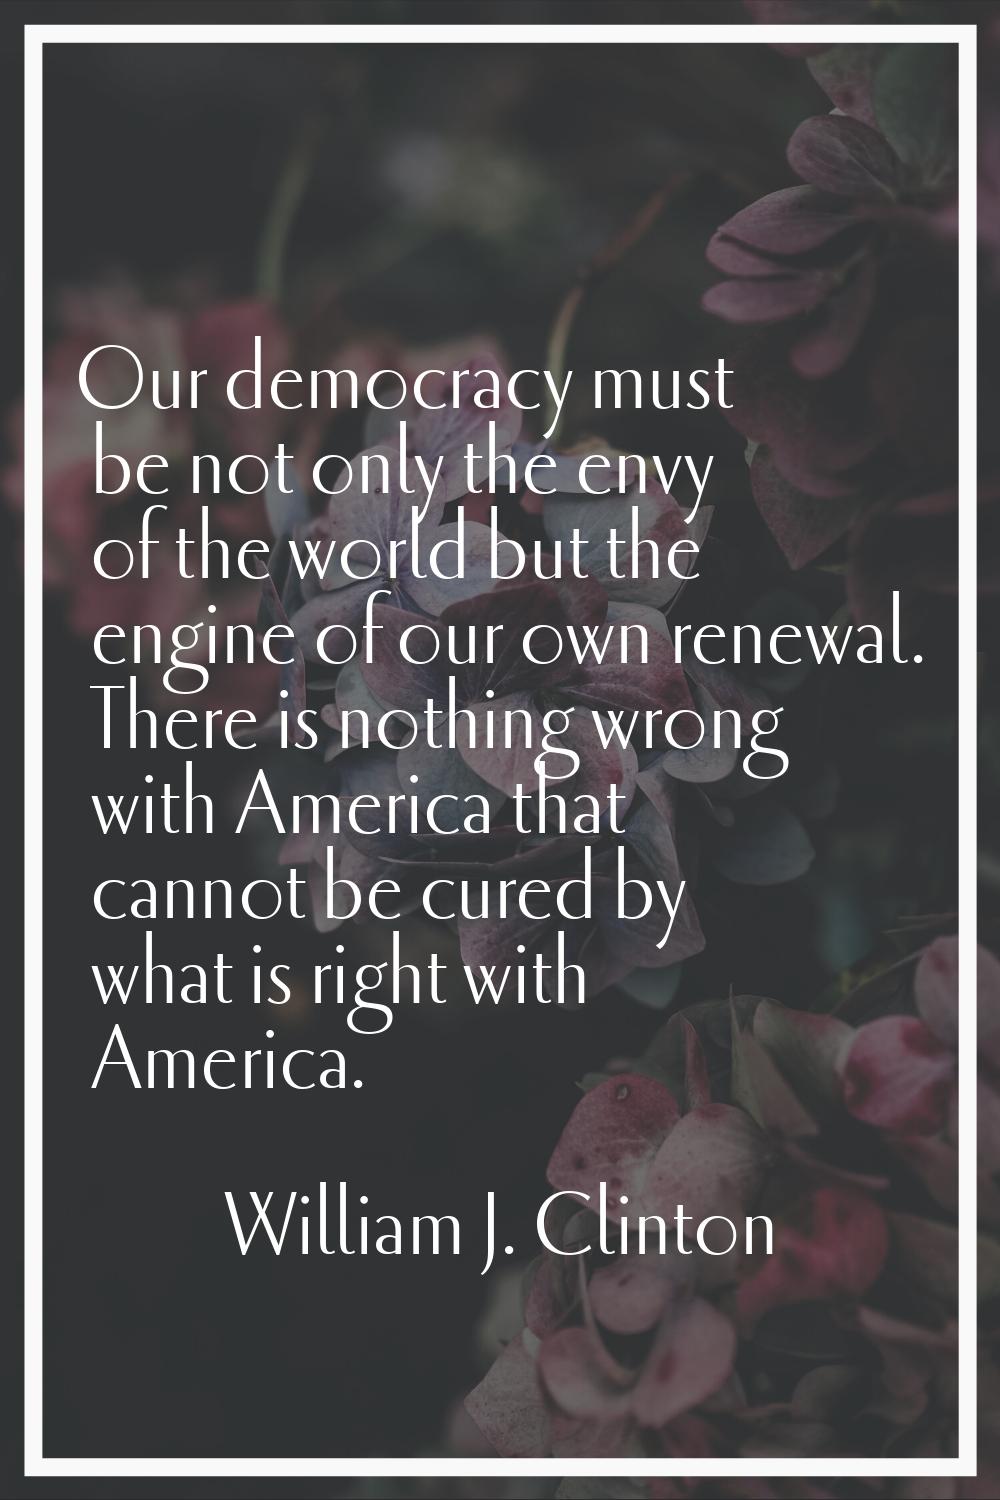 Our democracy must be not only the envy of the world but the engine of our own renewal. There is no